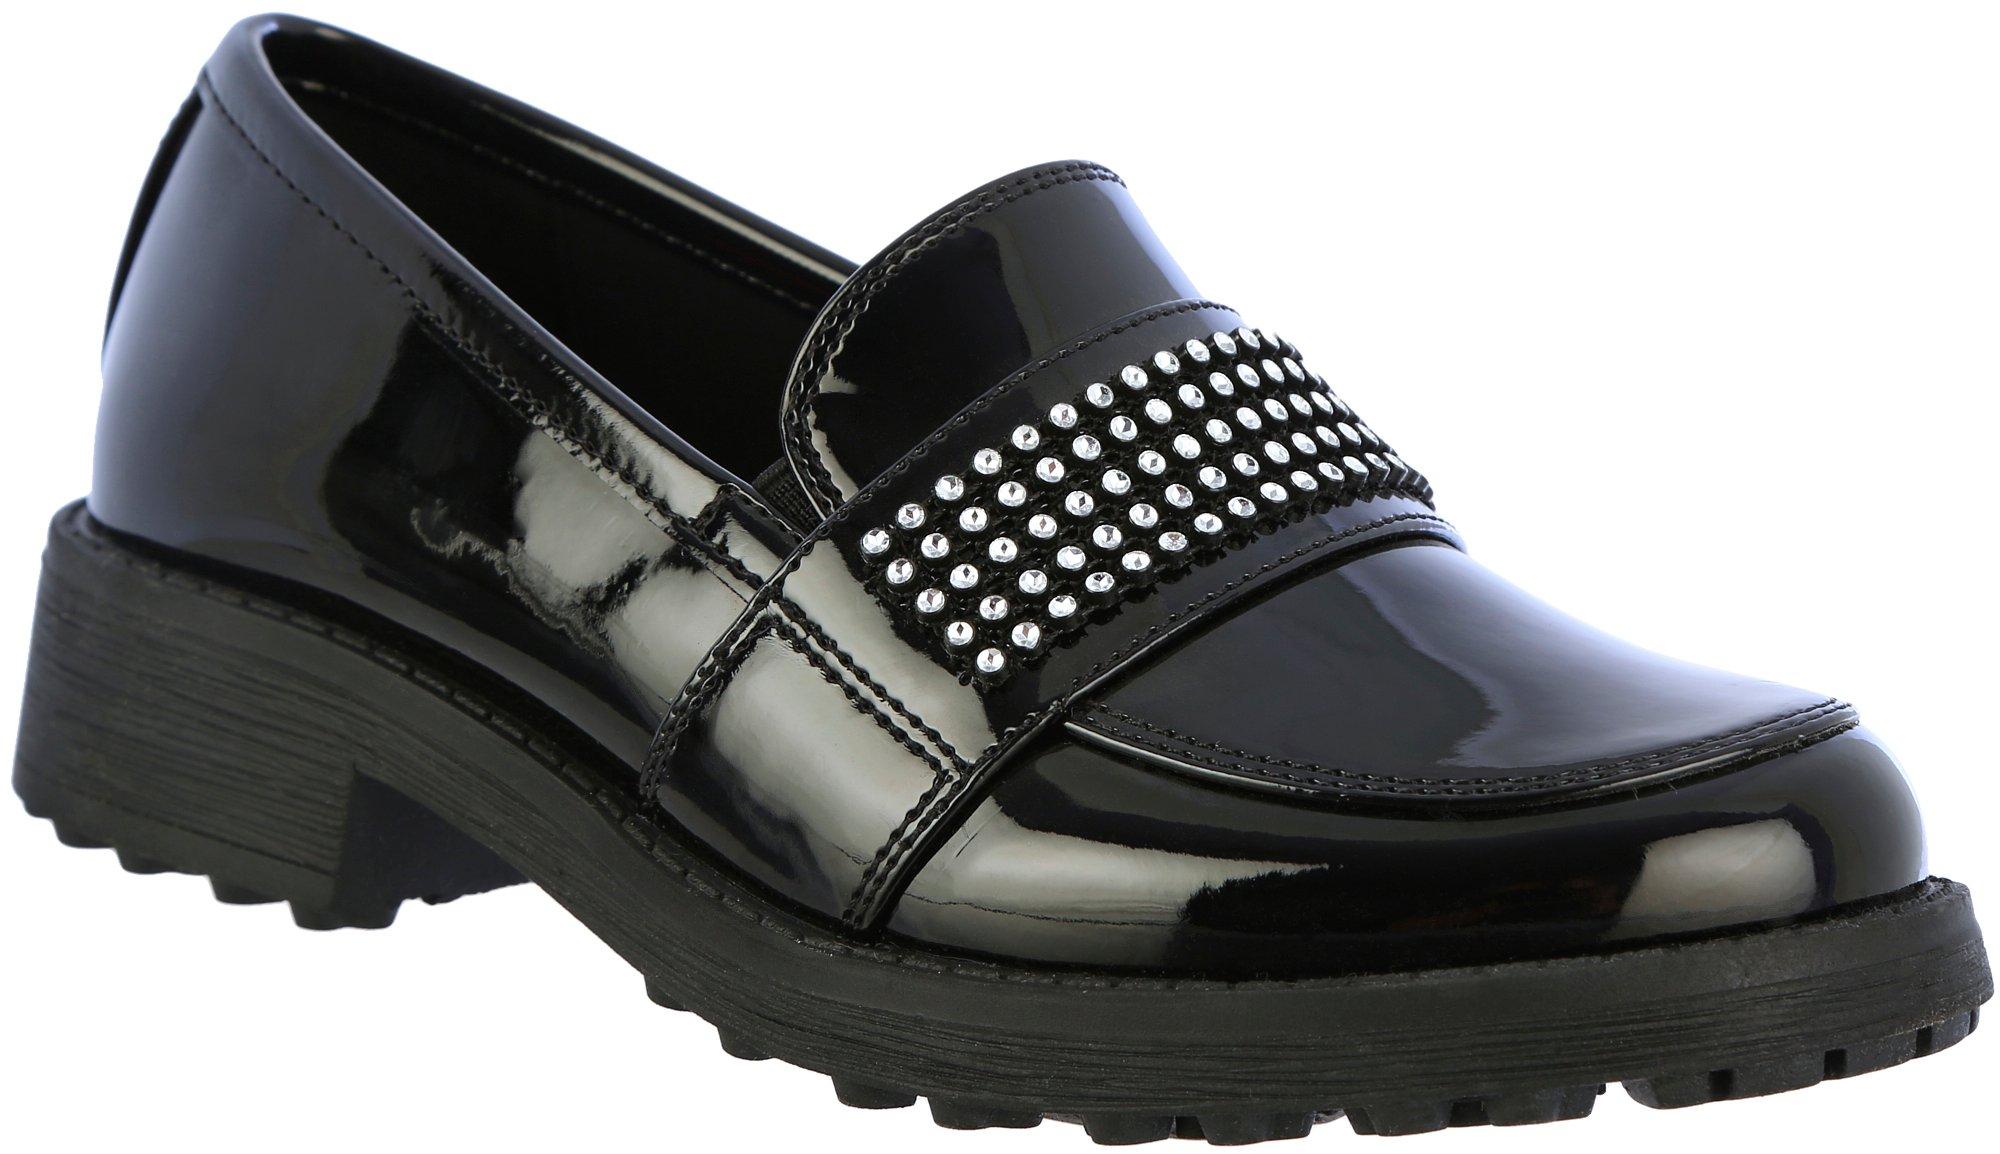 Girls Maude Blk Pate Casual Shoes